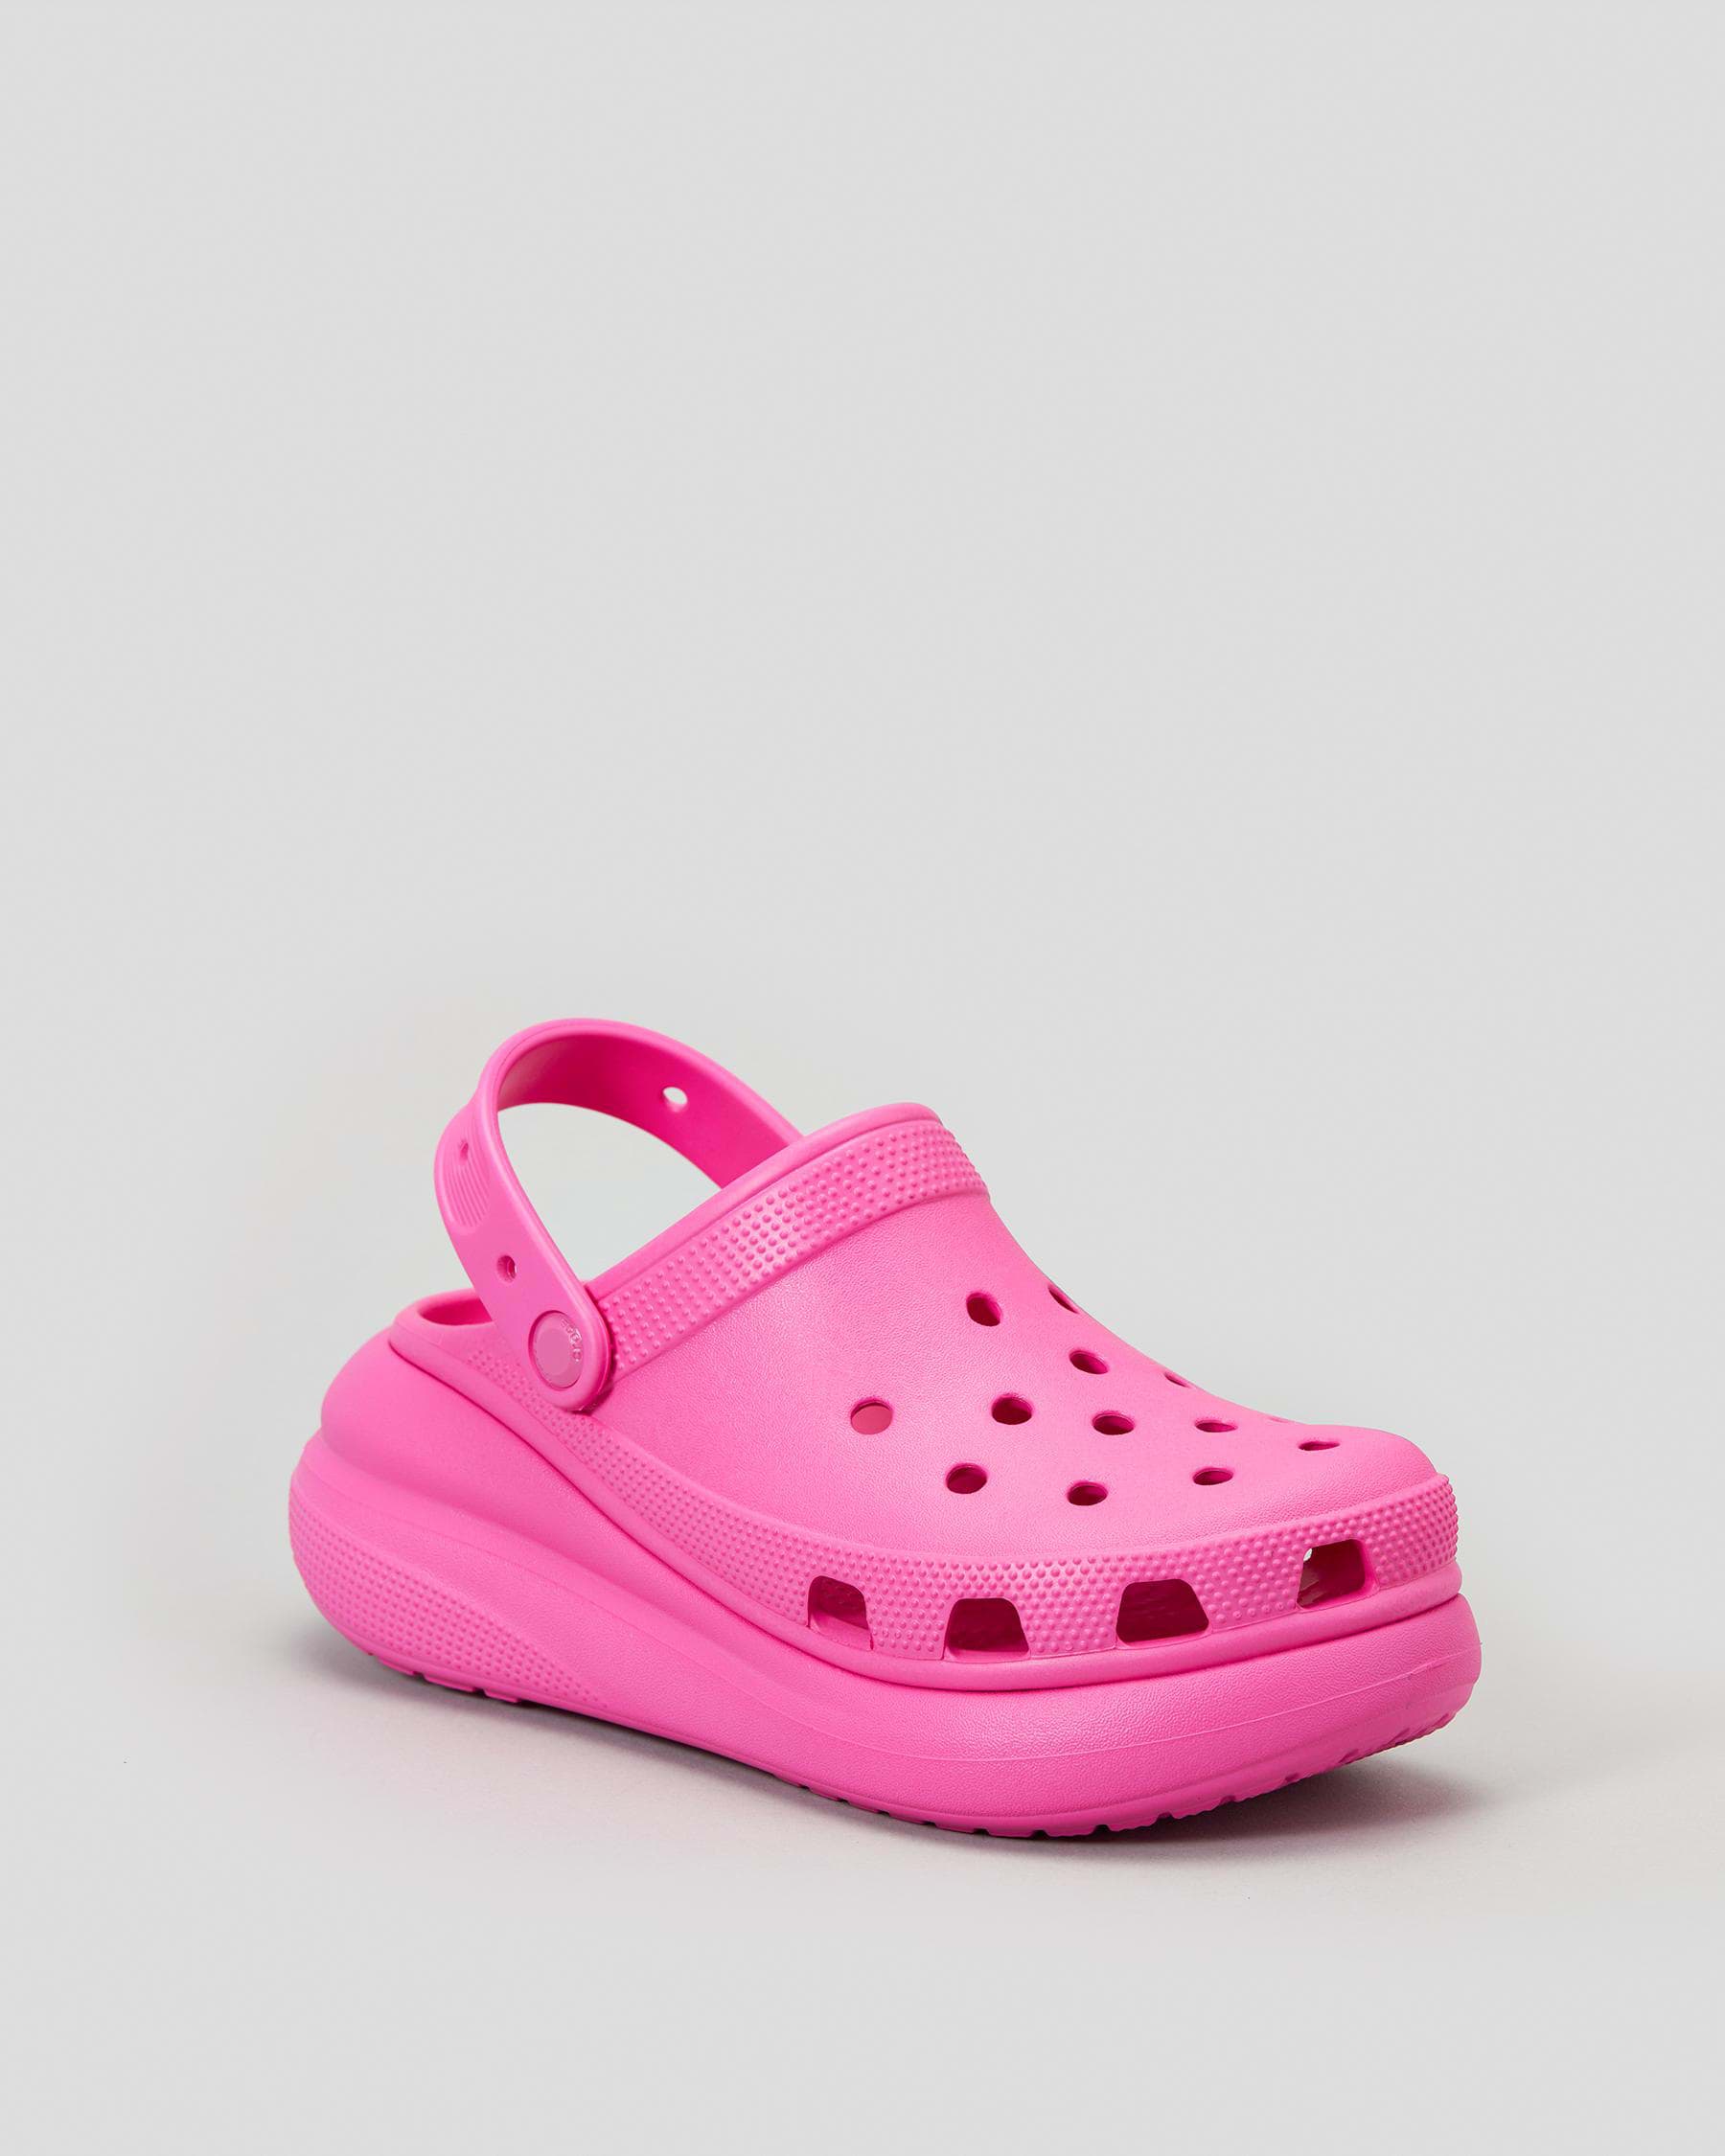 Crocs Crush Clogs In Juice - Fast Shipping & Easy Returns - City Beach ...